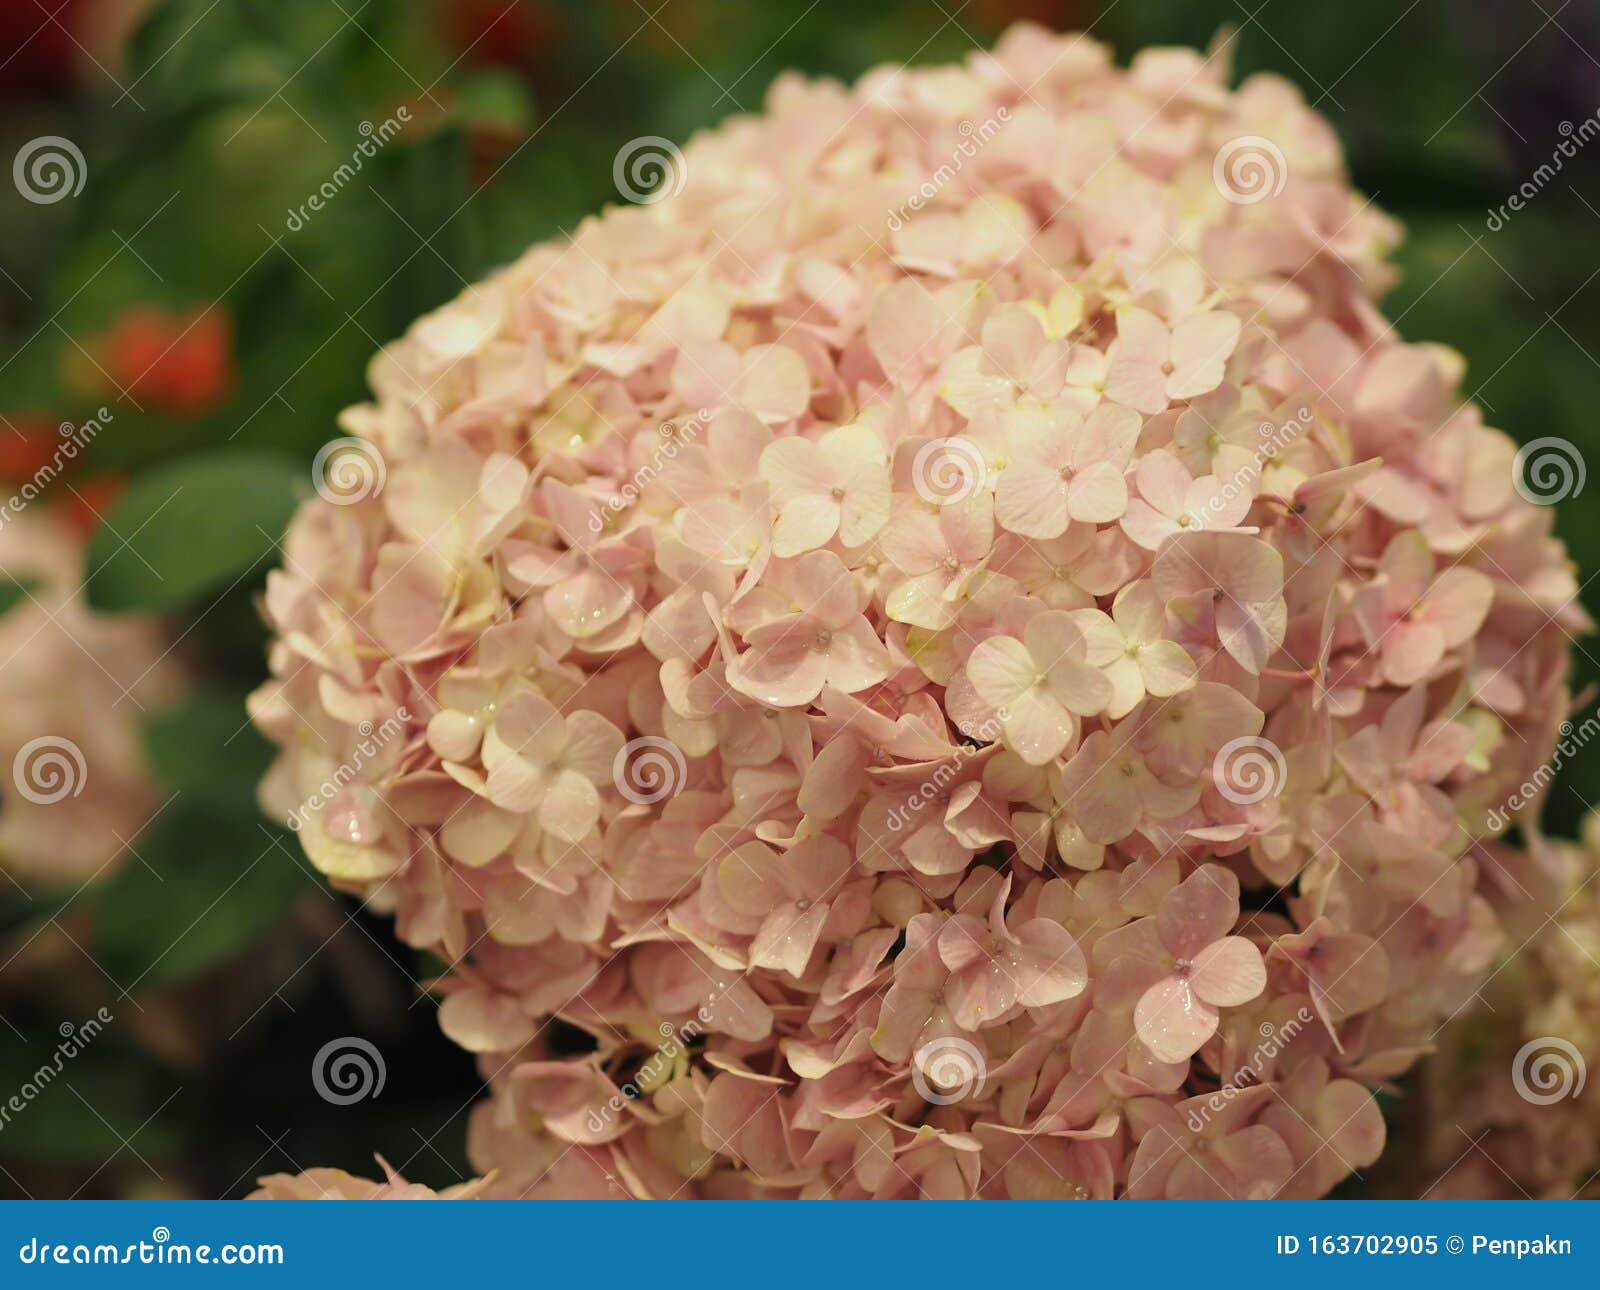 Hydrangea Or Ajisai Pink Flower On Blurred Of Nature Background Stock Image Image Of Bunch Branch